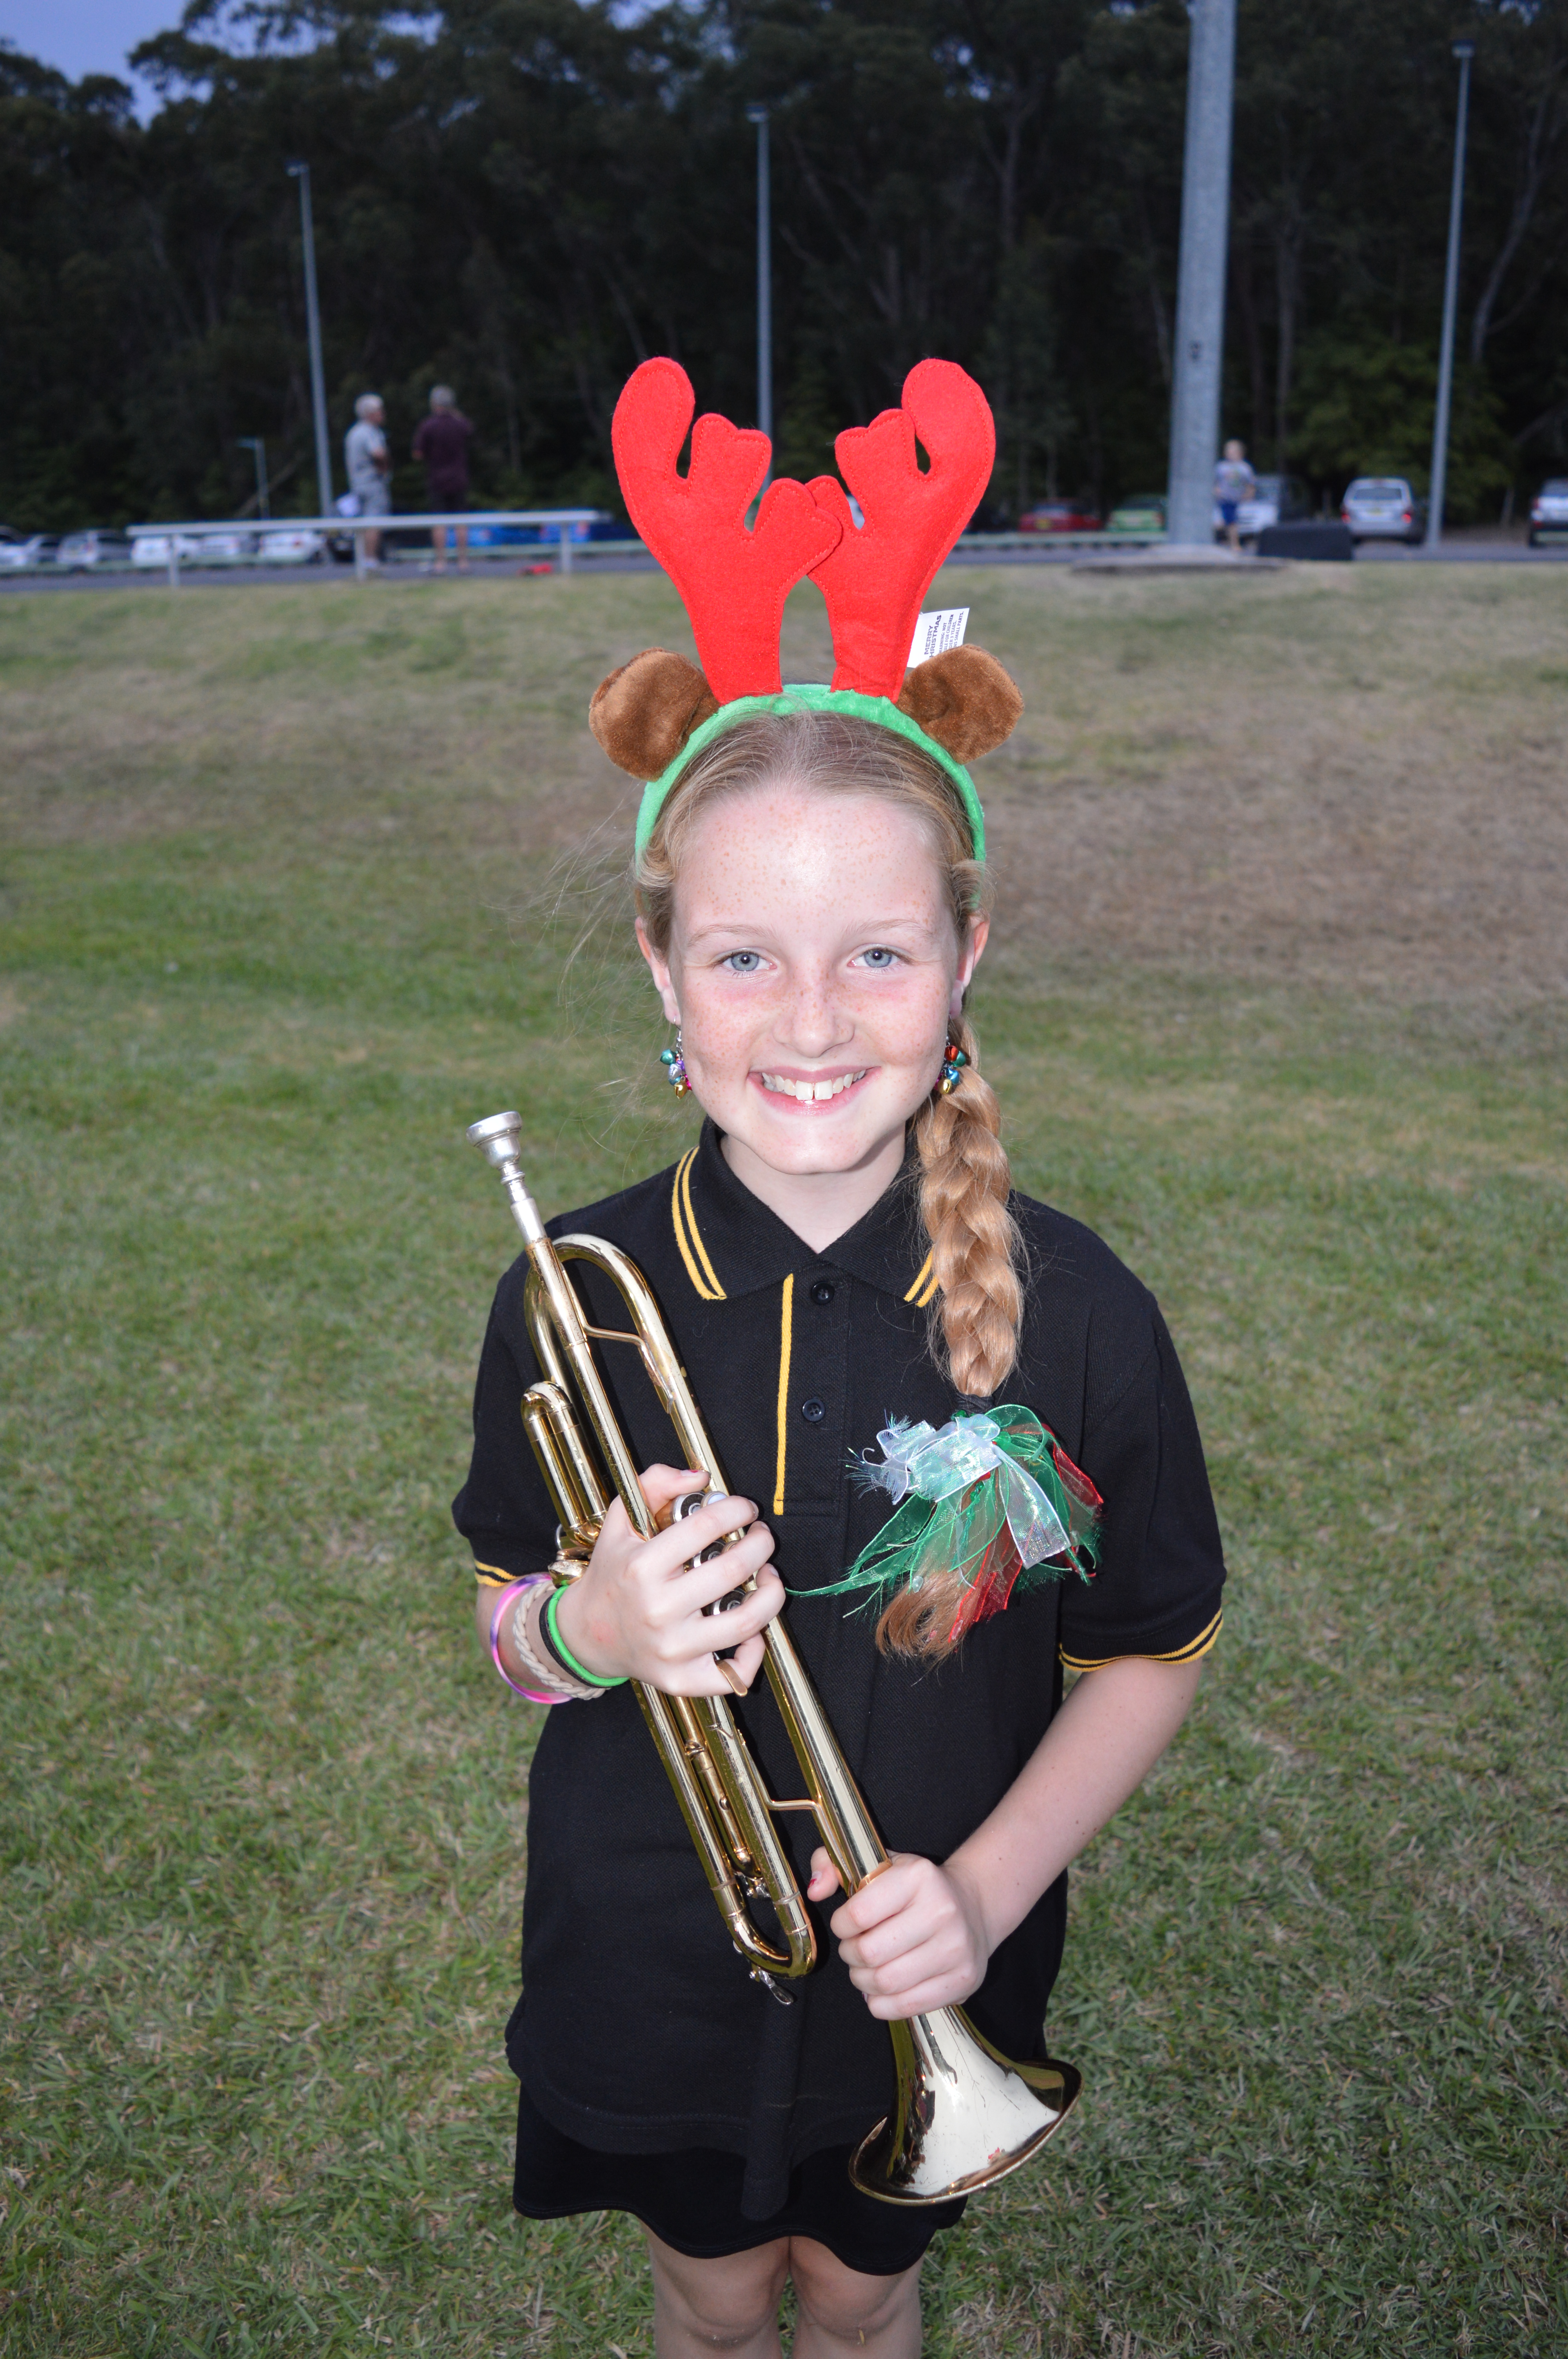 Keira Thoburn, trumpeter for Medowie Public School Band, before her performance.